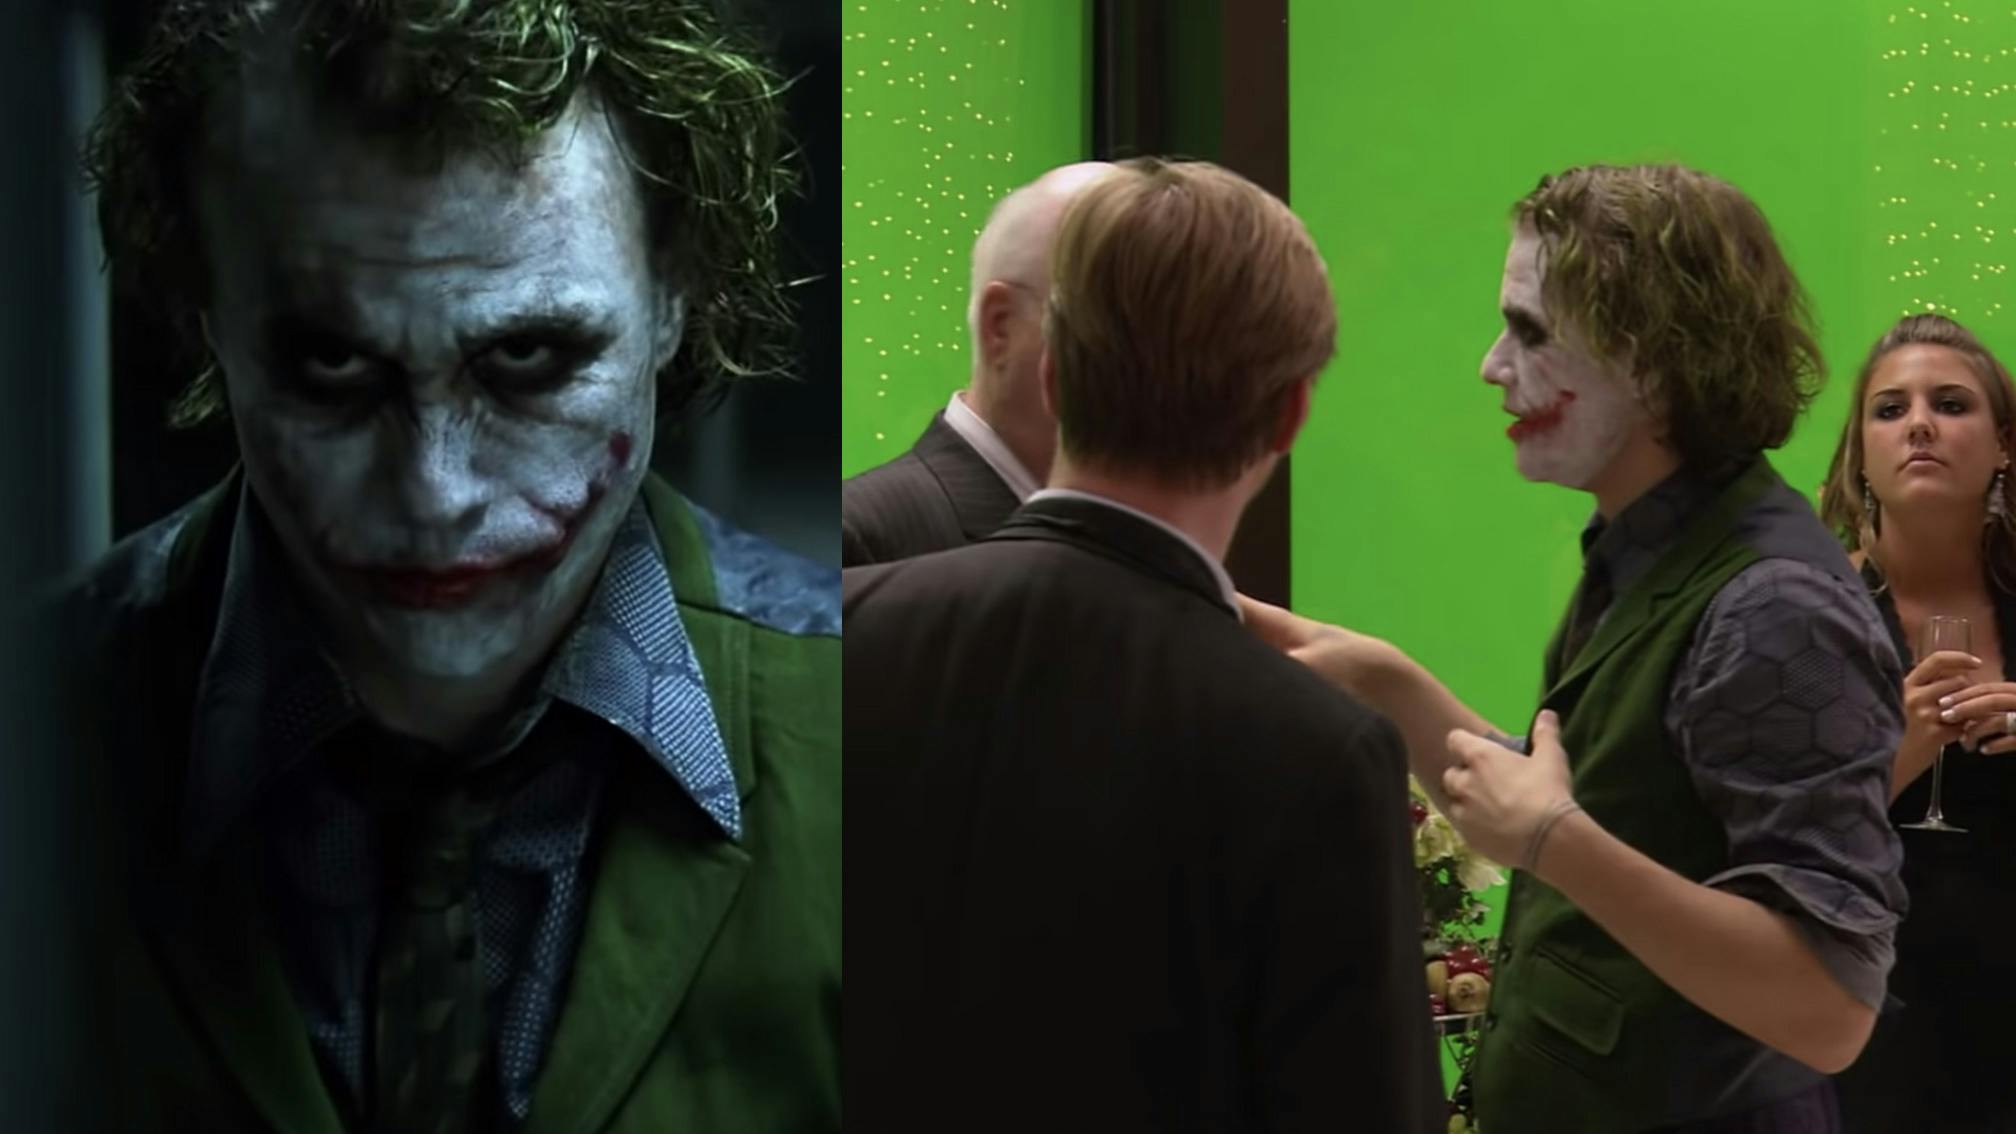 Watch The Fire Rises: The Creation And Impact of The Dark Knight Trilogy Documentary